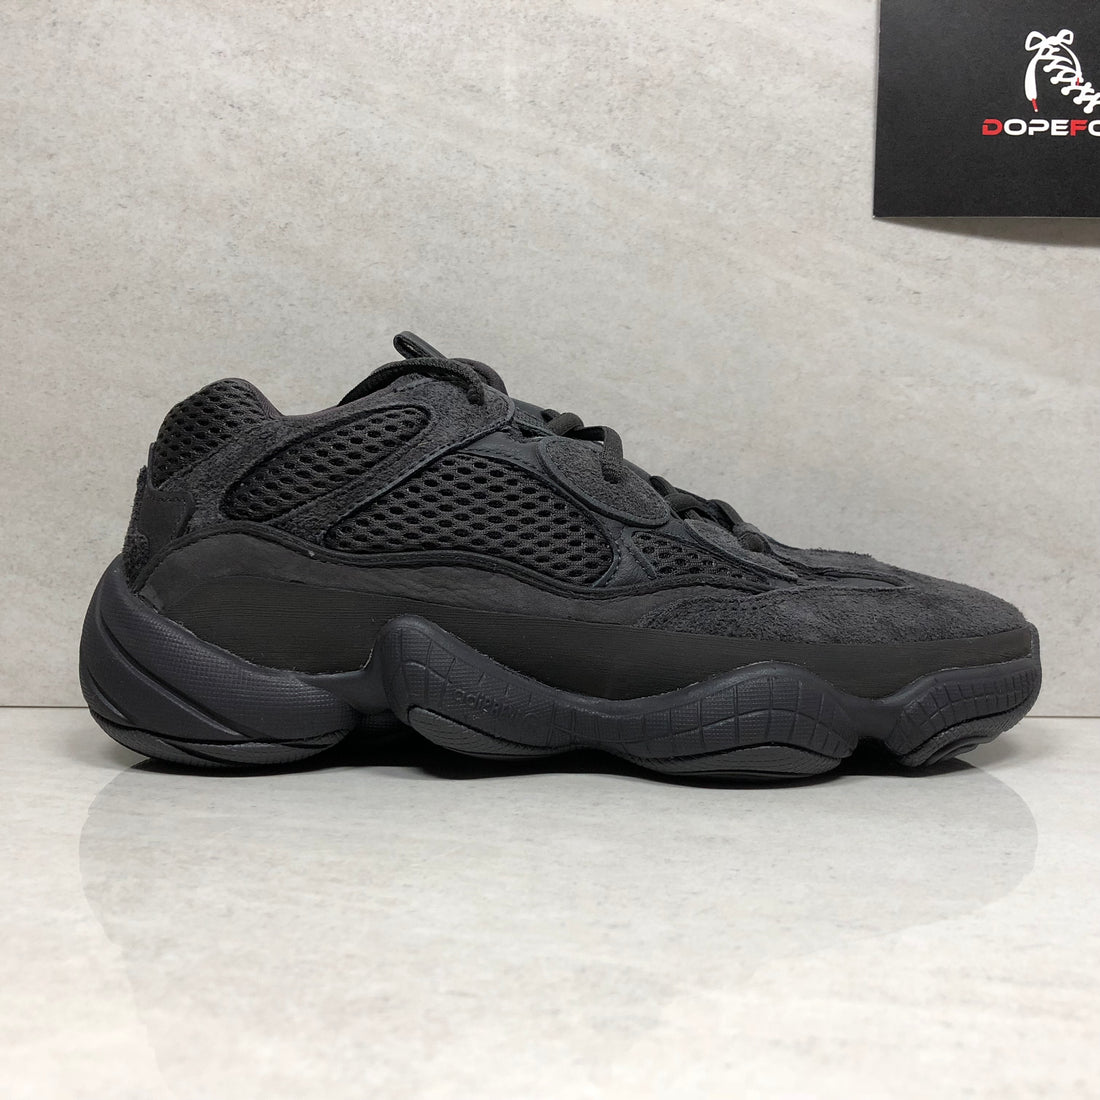 Adidas Yeezy 500 Utility Black Real vs Fake Guide - Photos, Videos, and Notes